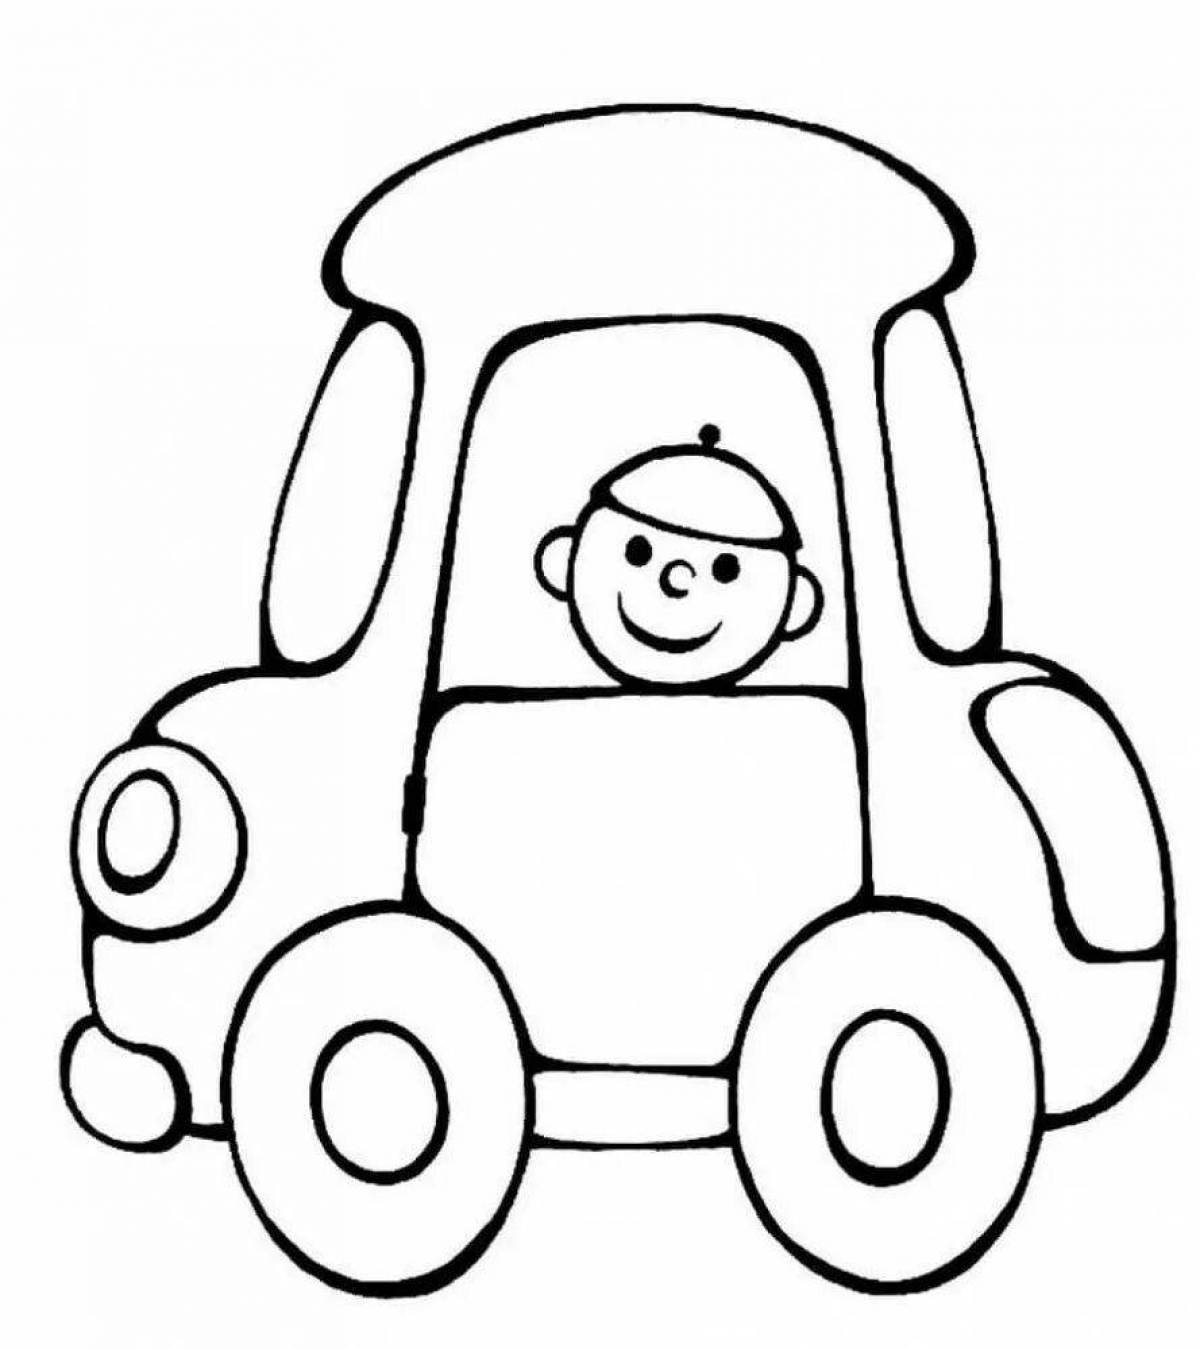 Coloring book wonderful cars for kids